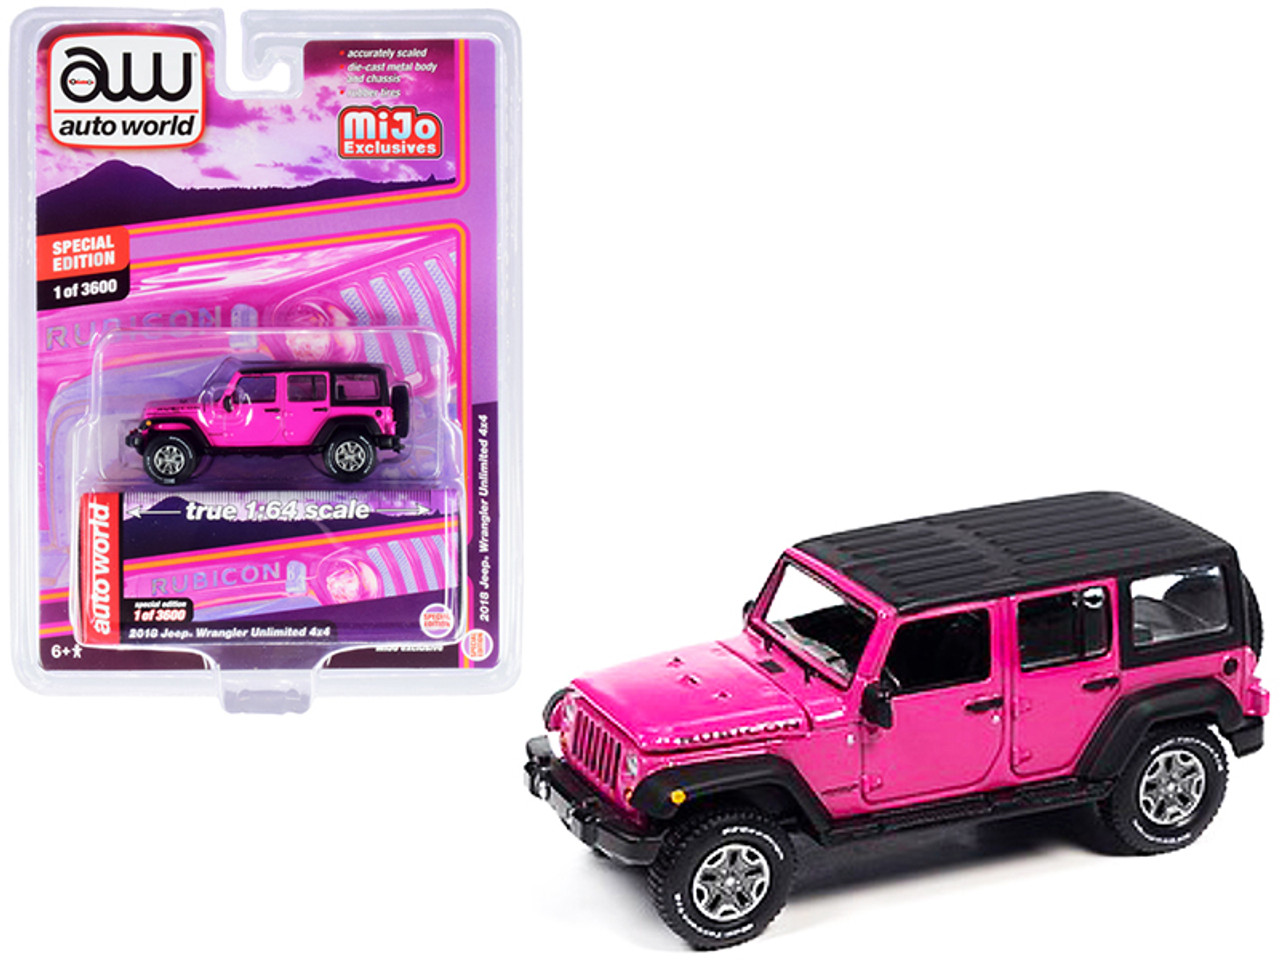 2018 Jeep Wrangler Rubicon Unlimited 4x4 Pink with Black Top Limited Edition to 3600 pieces Worldwide 1/64 Diecast Model Car by Autoworld